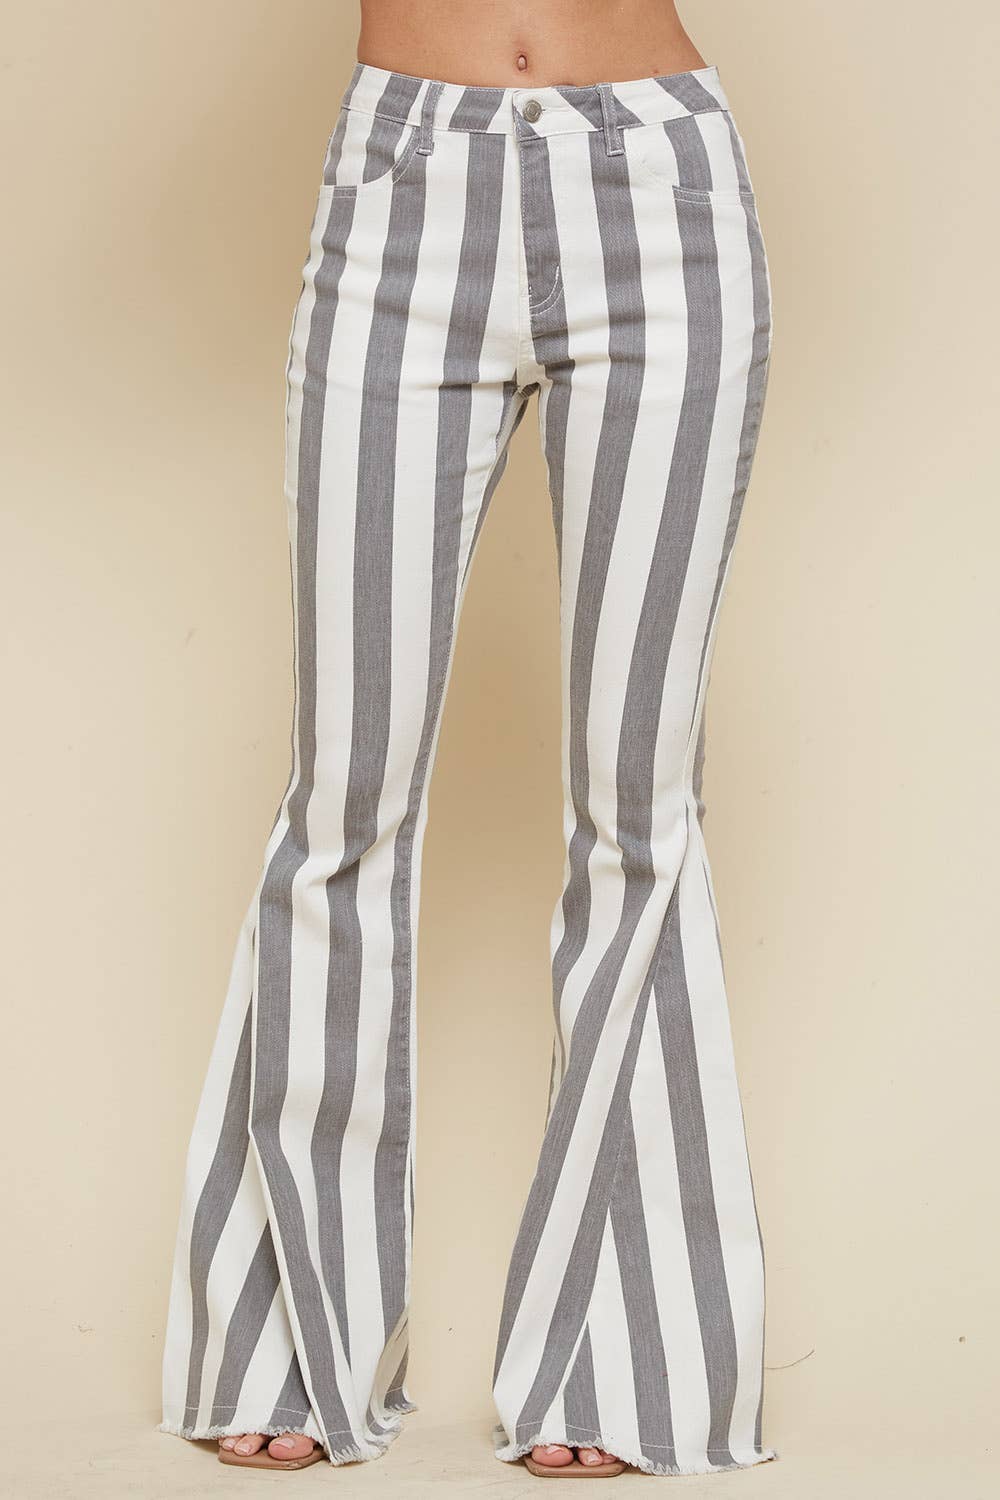 WISTERIA LANE - STRIPED FLARE BELLBOTTOM JEANS - CHARCOAL (7816406008035)